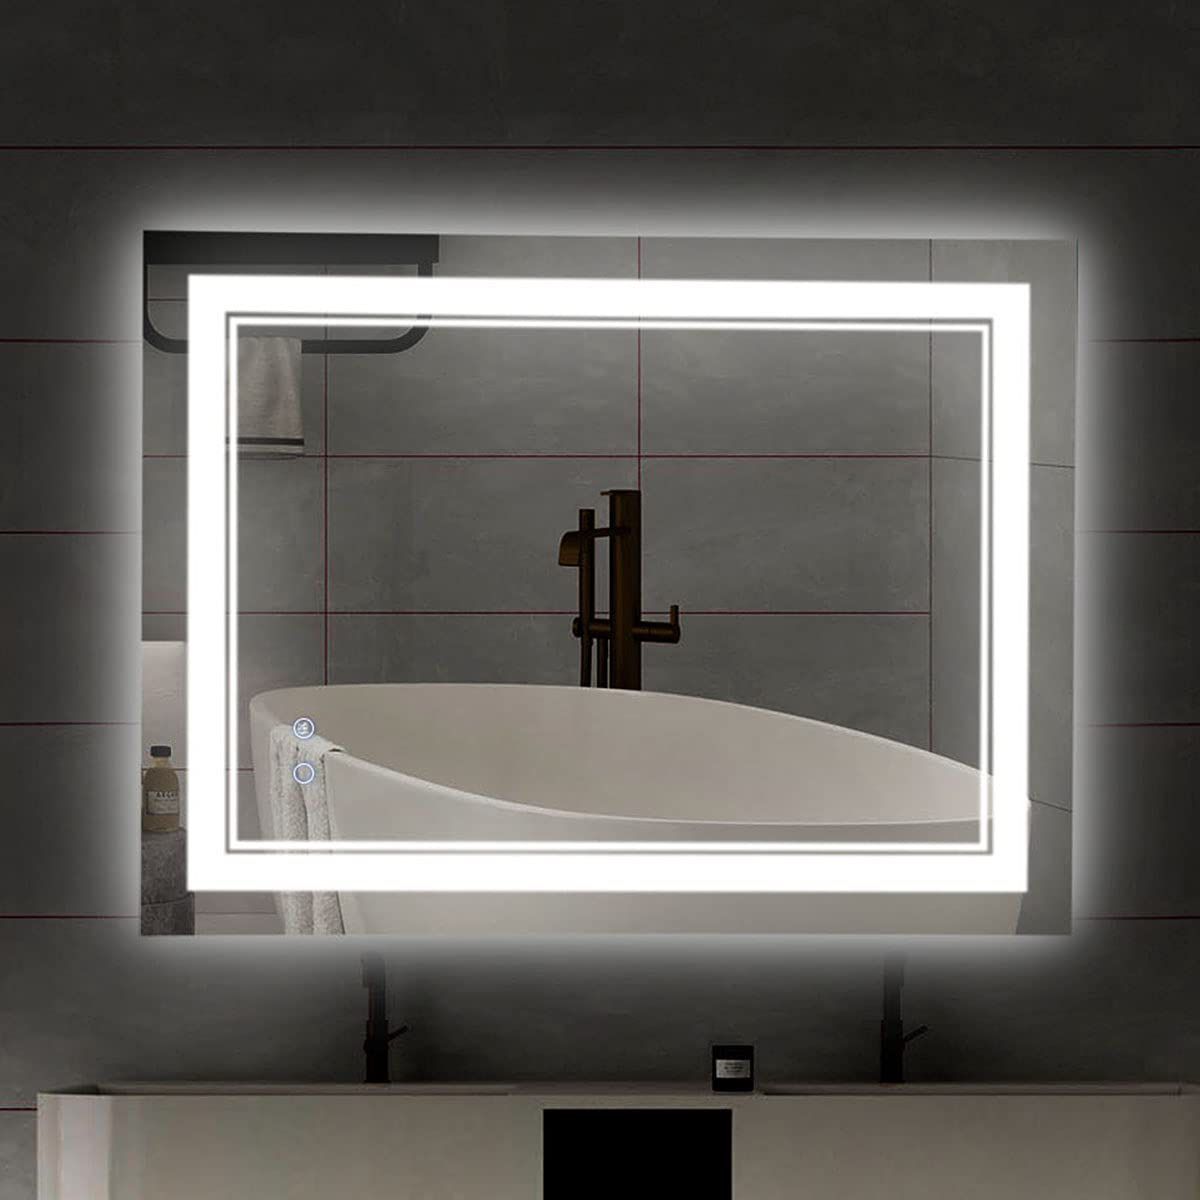 NEW! 24 X 32 Inch LED Bathroom Vanity Mirrors Dimmable Adjustable Light Wall Mounted Square Anti-Fog Touch Switch Smart Makeup Mirror For Wall - 3 Dim